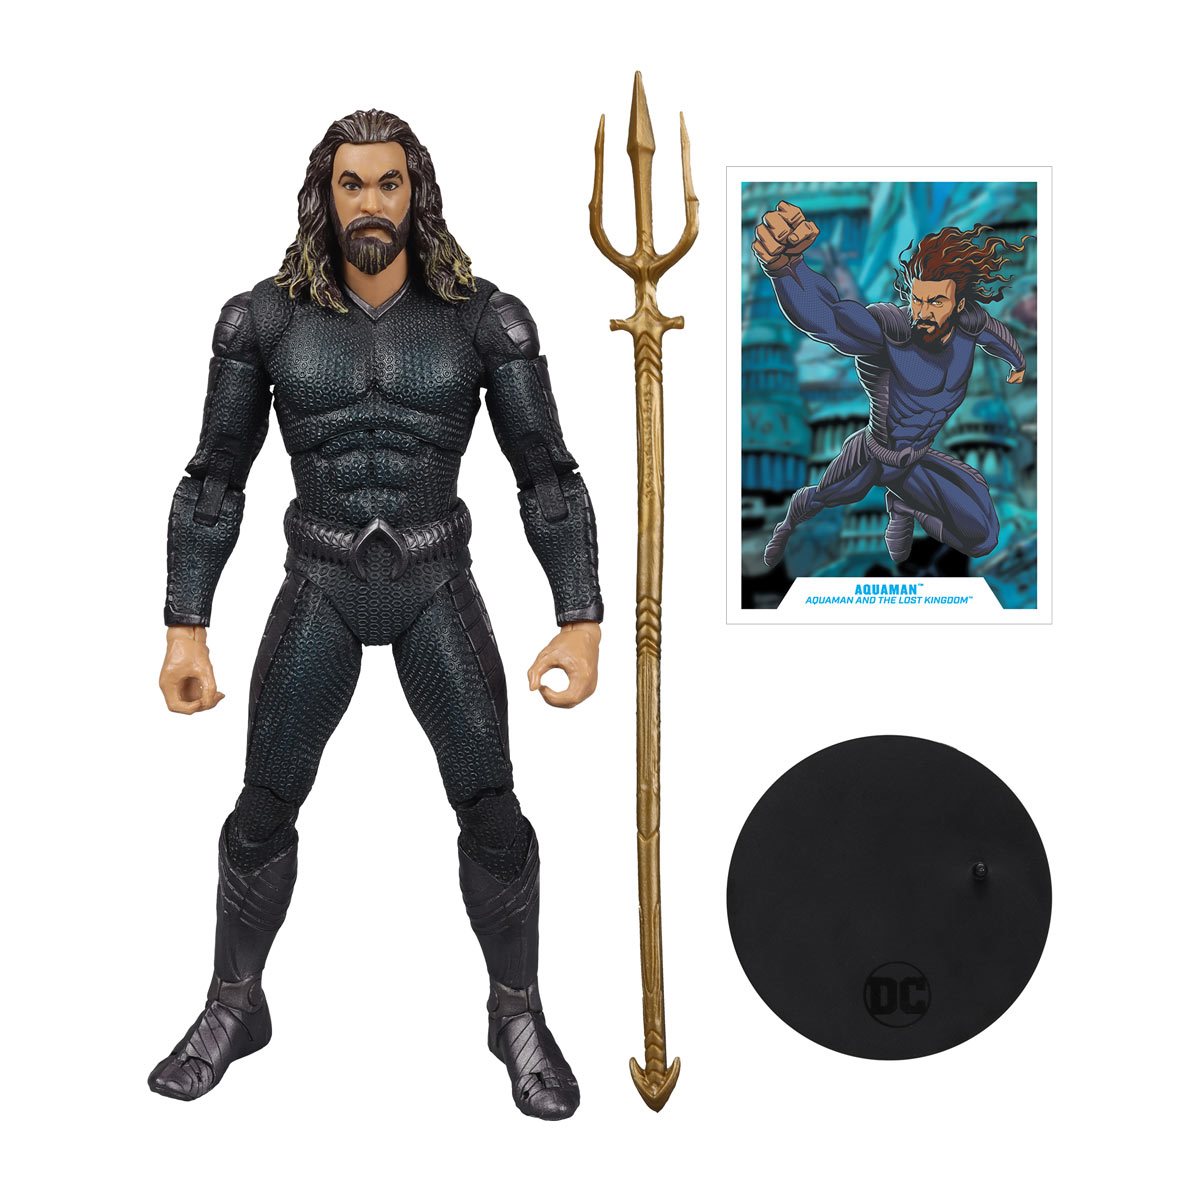 DC Multiverse Aquaman and the Lost Kingdom Movie Aquaman with